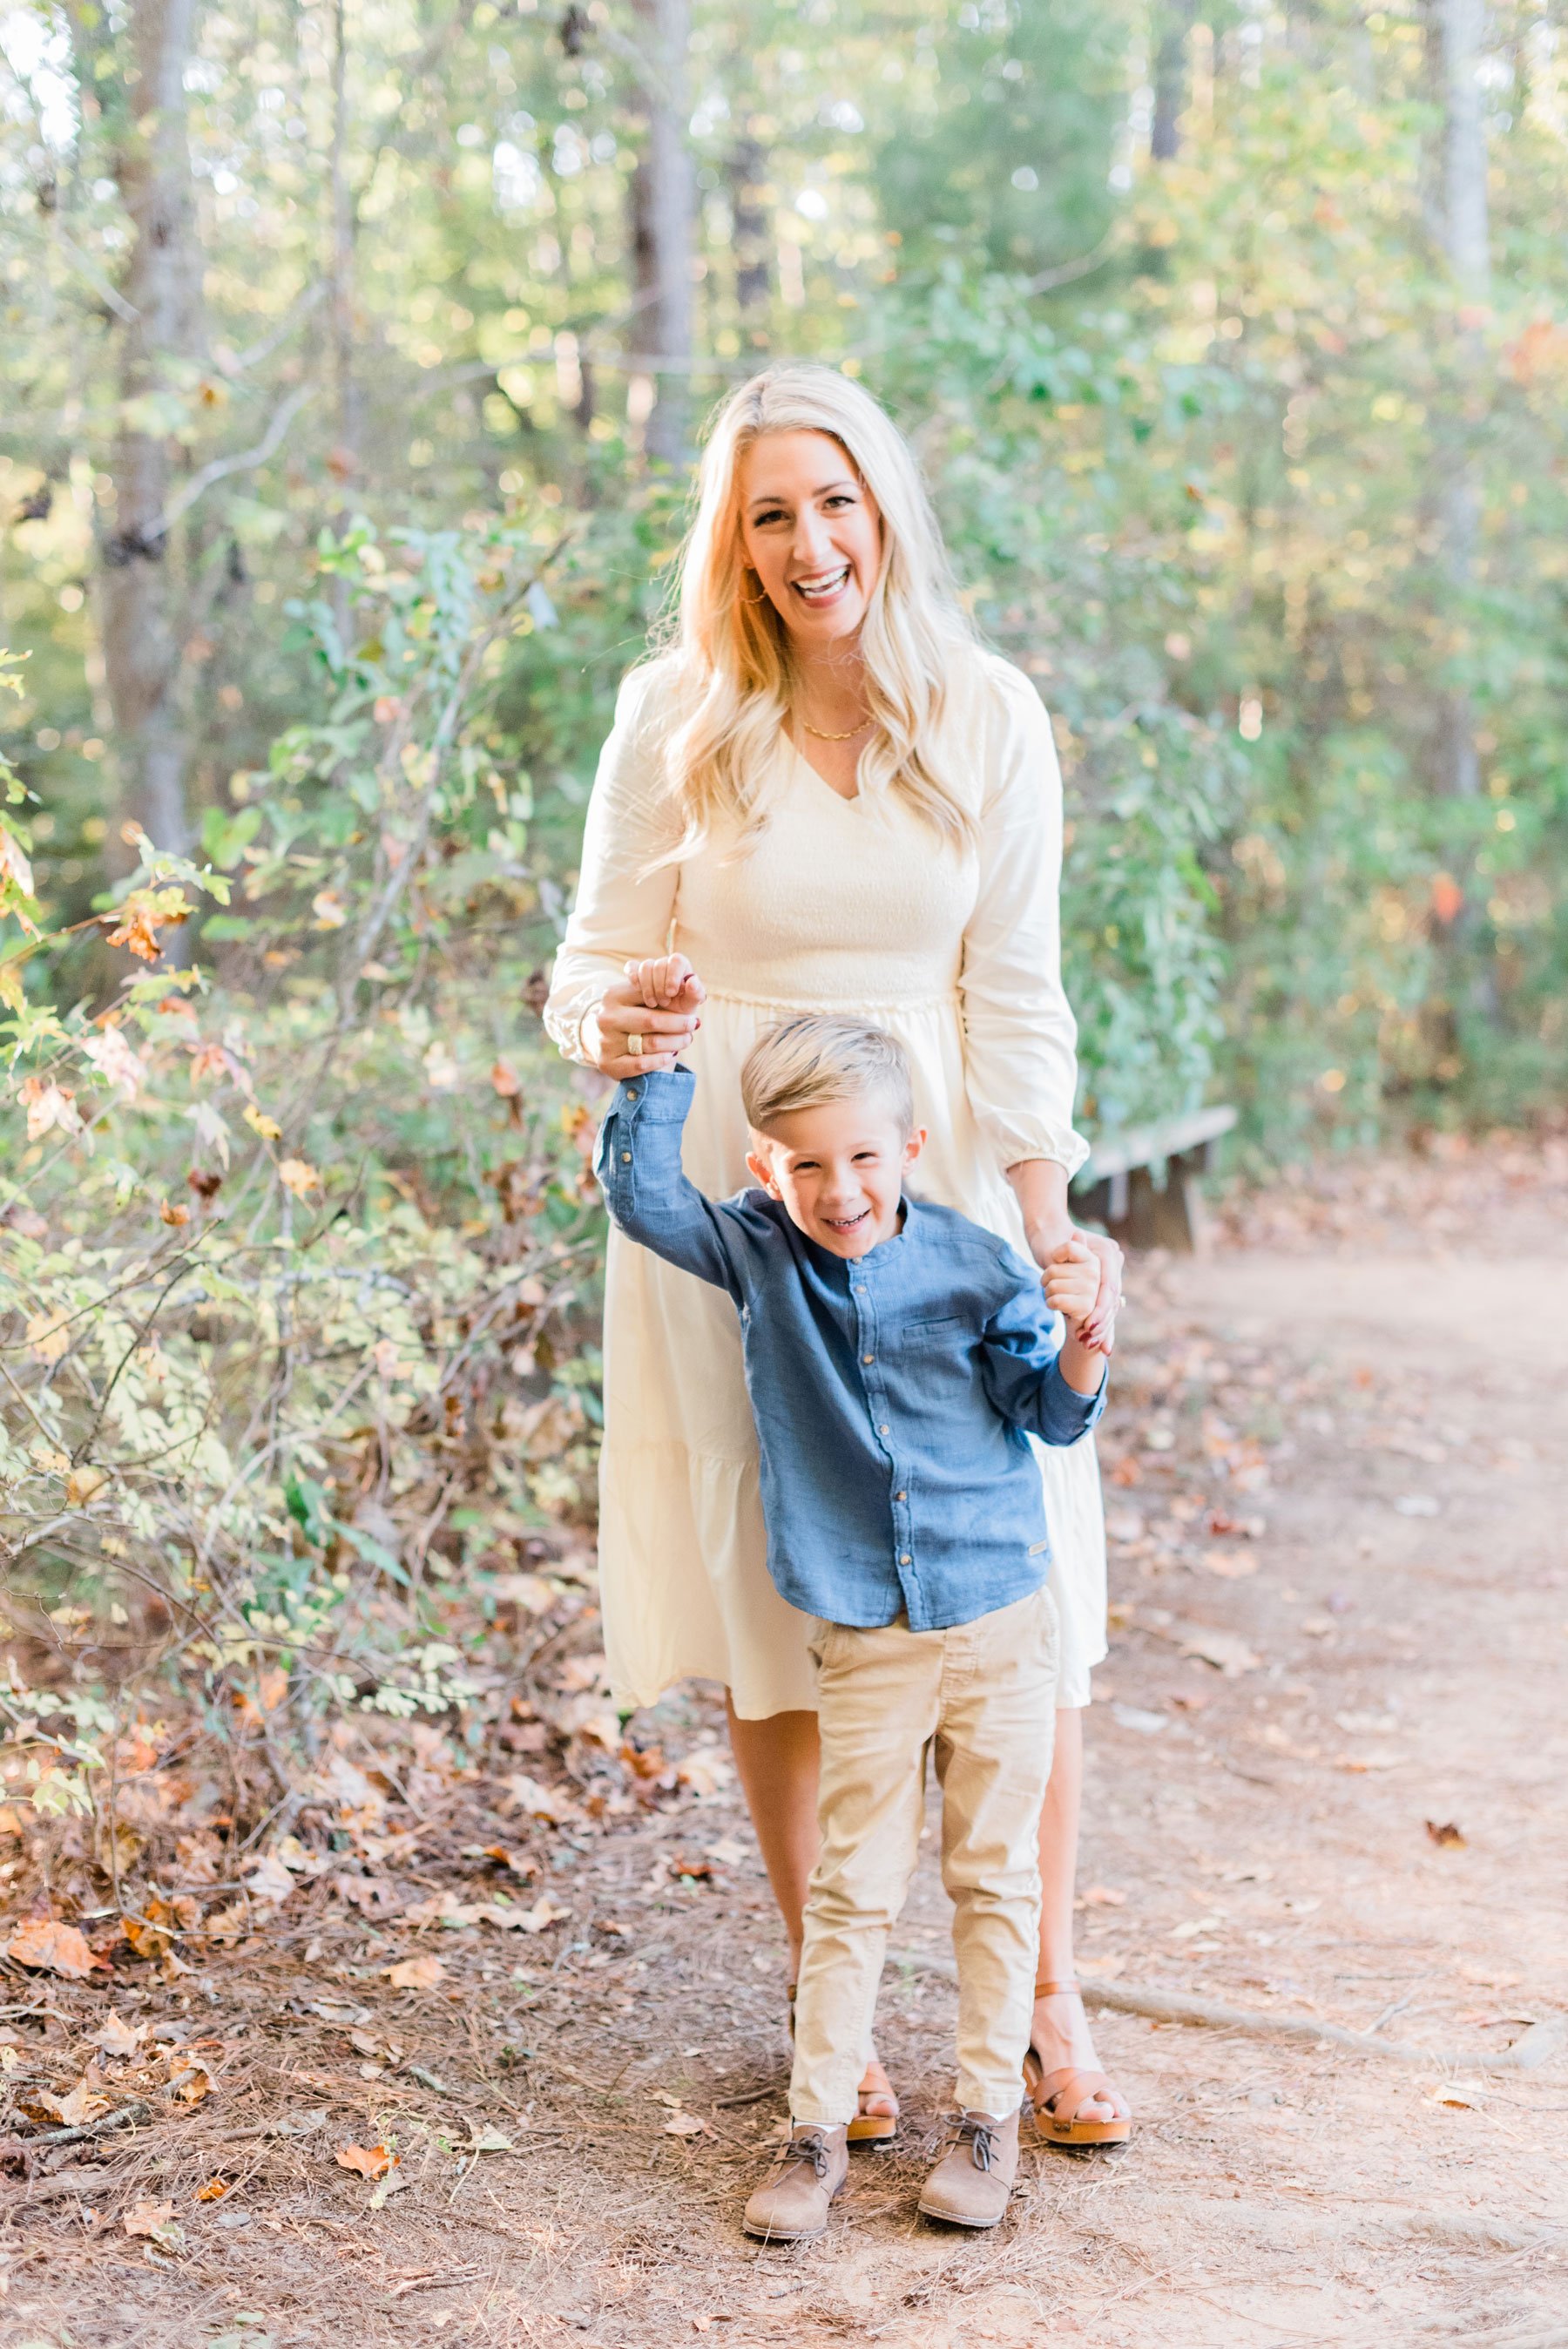  Jacquie Erickson, an Atlanta-based photographer, captures a sweet photo of a mother and son in the woods of Georgia. Jacquie Erickson mother son Peachtree City Fayetteville Senoia photo color palette #photoshootoutfits #photocolorpalette #familypict